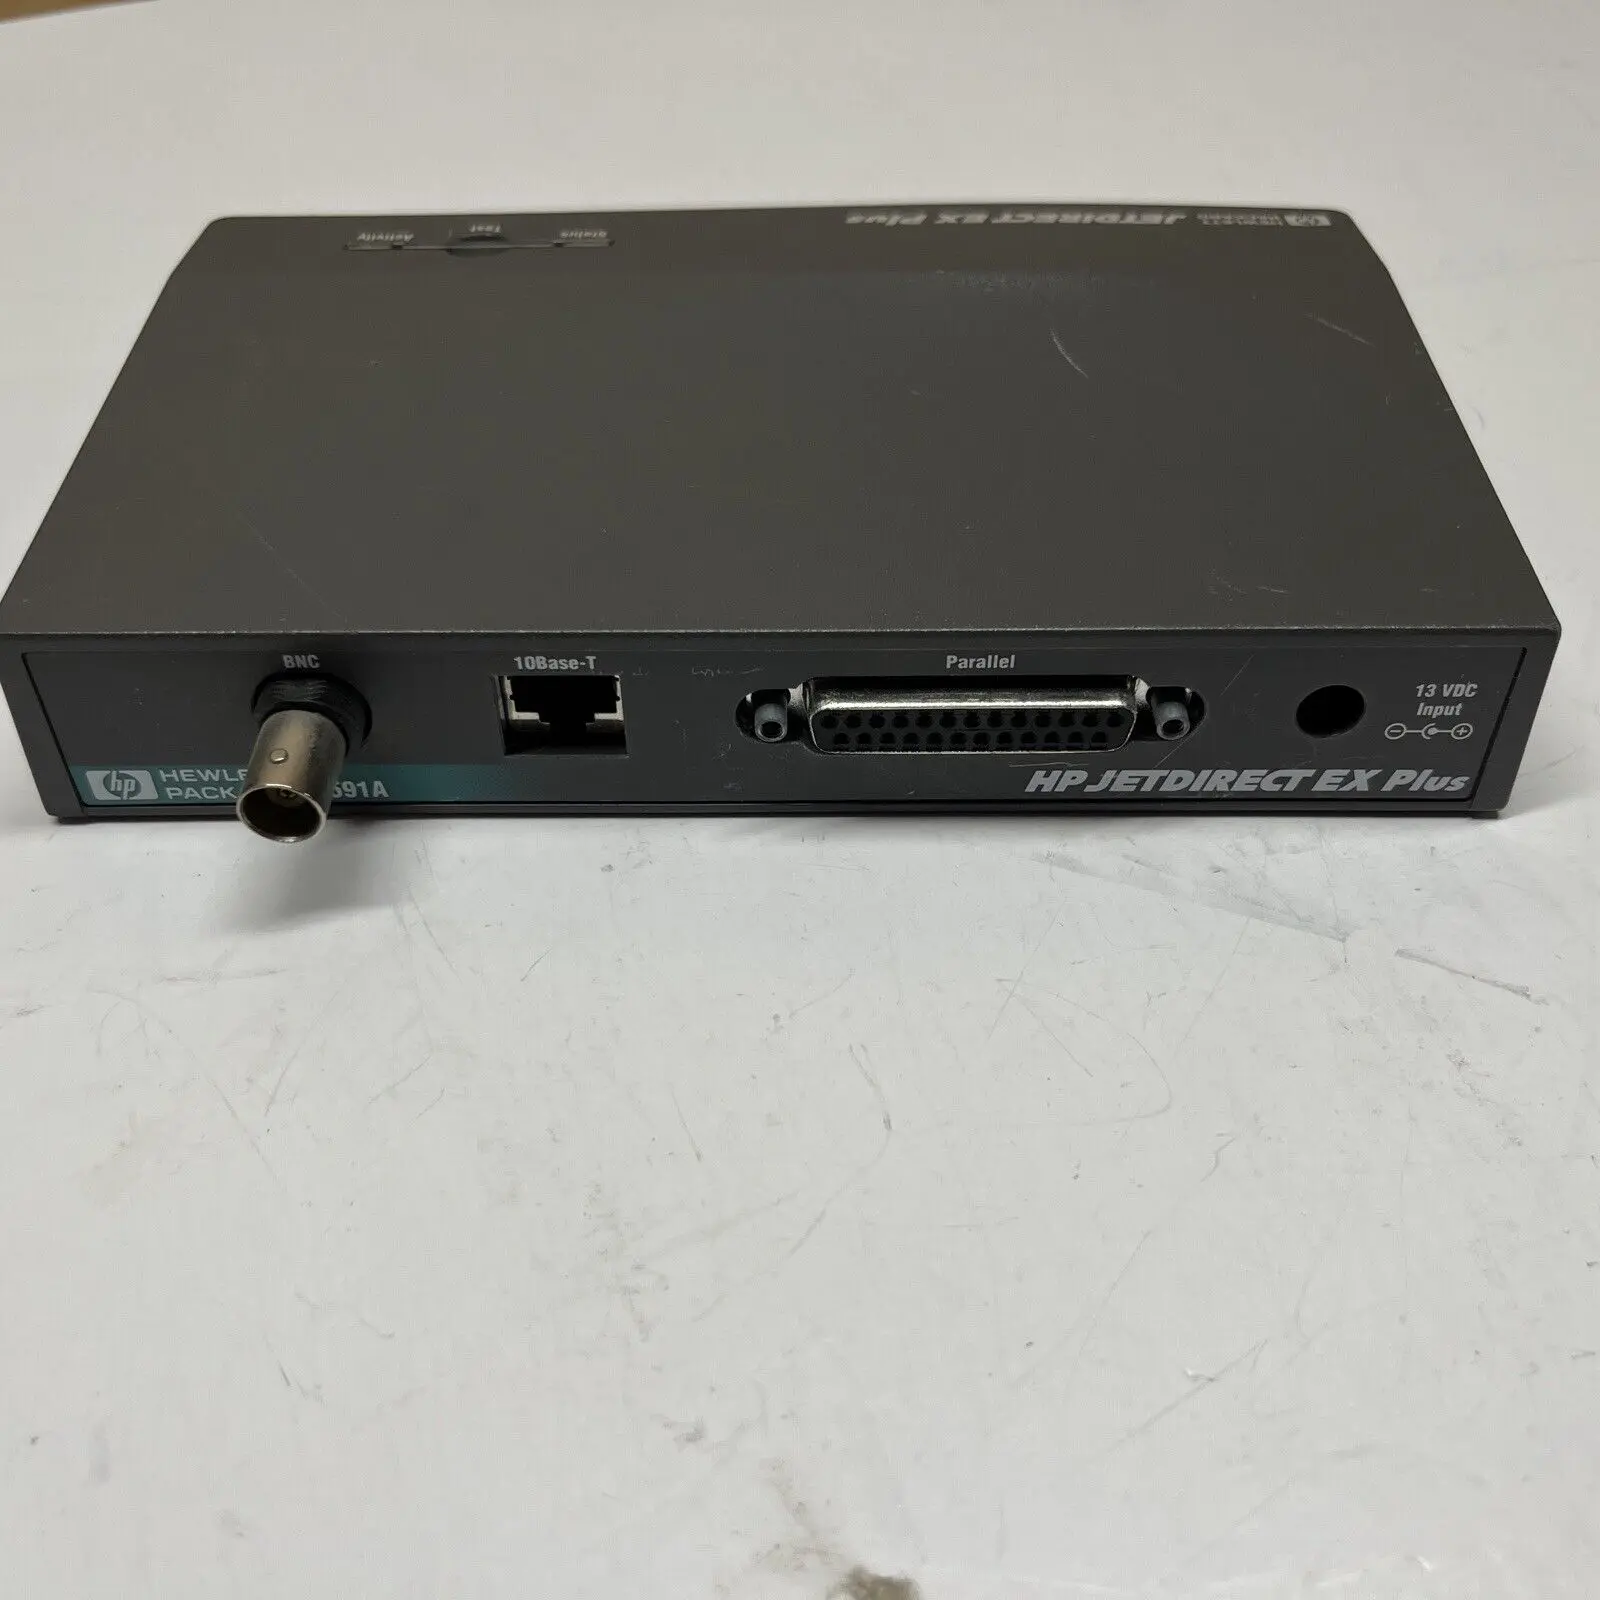 Hp jetdirect ex plus j2591a: ultimate networking solution